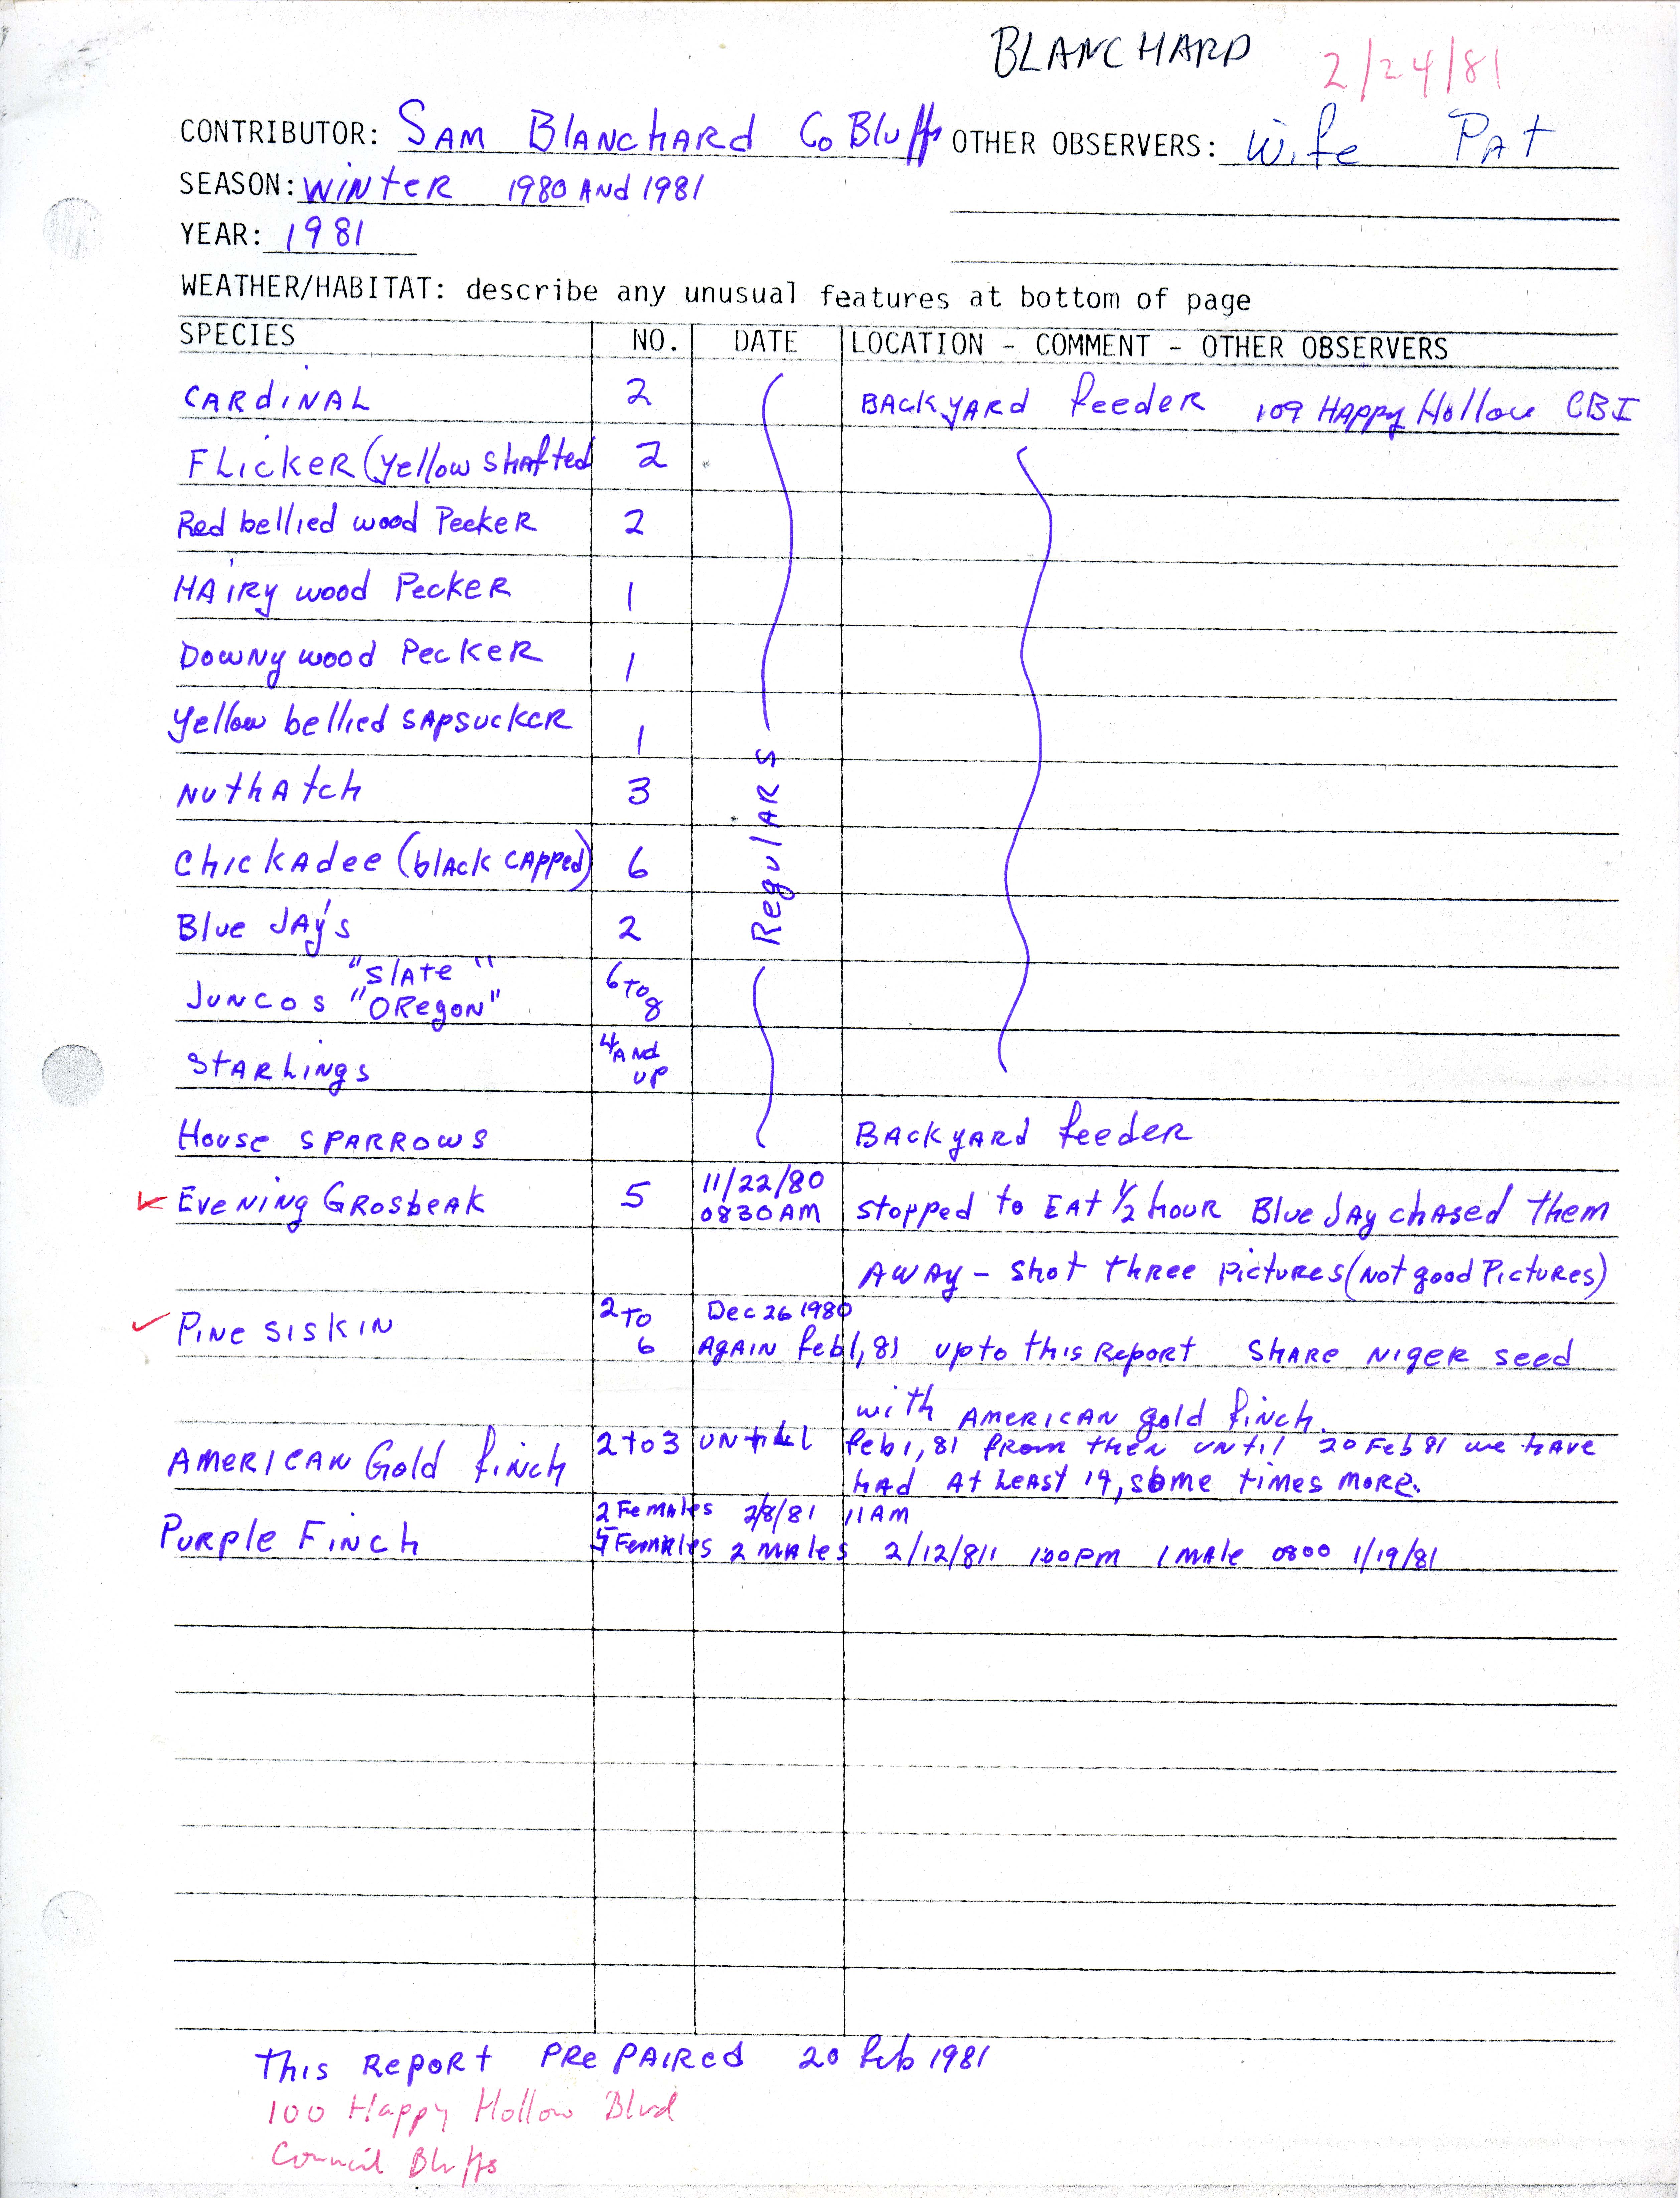 Annotated bird sighting list for winter 1980 and 1981 compiled by Sam Blanchard